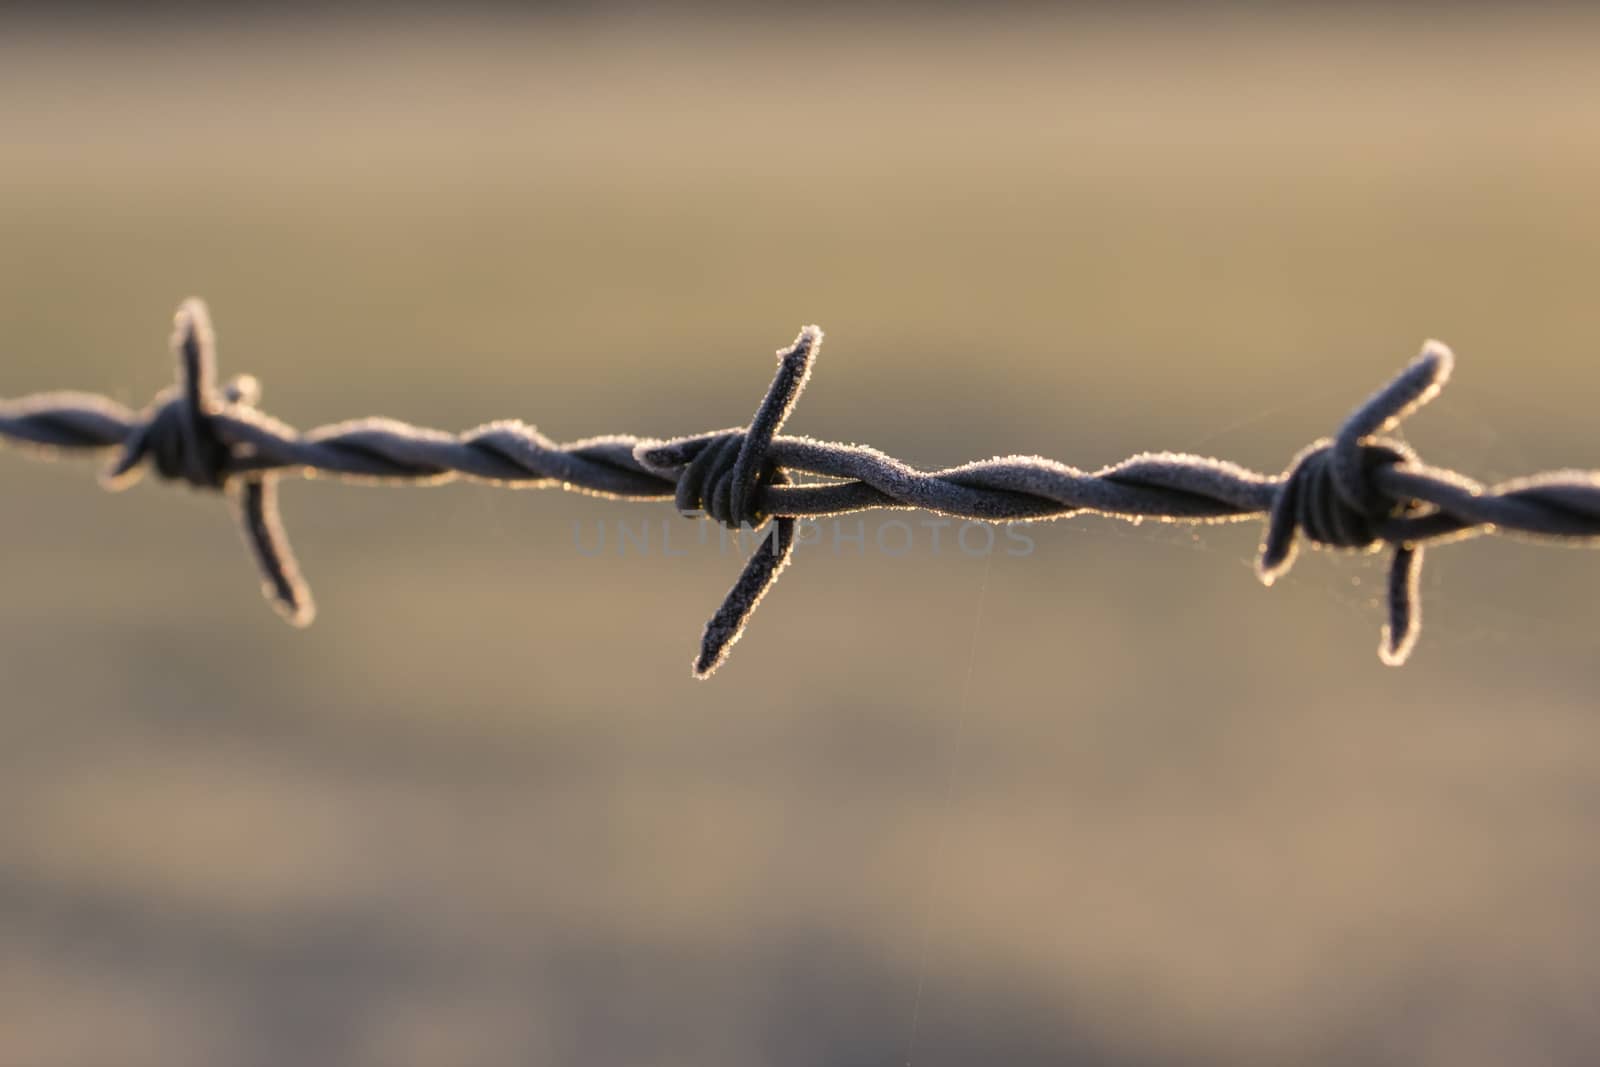 Frost on Barbed Wire Fence by IanSherriffs